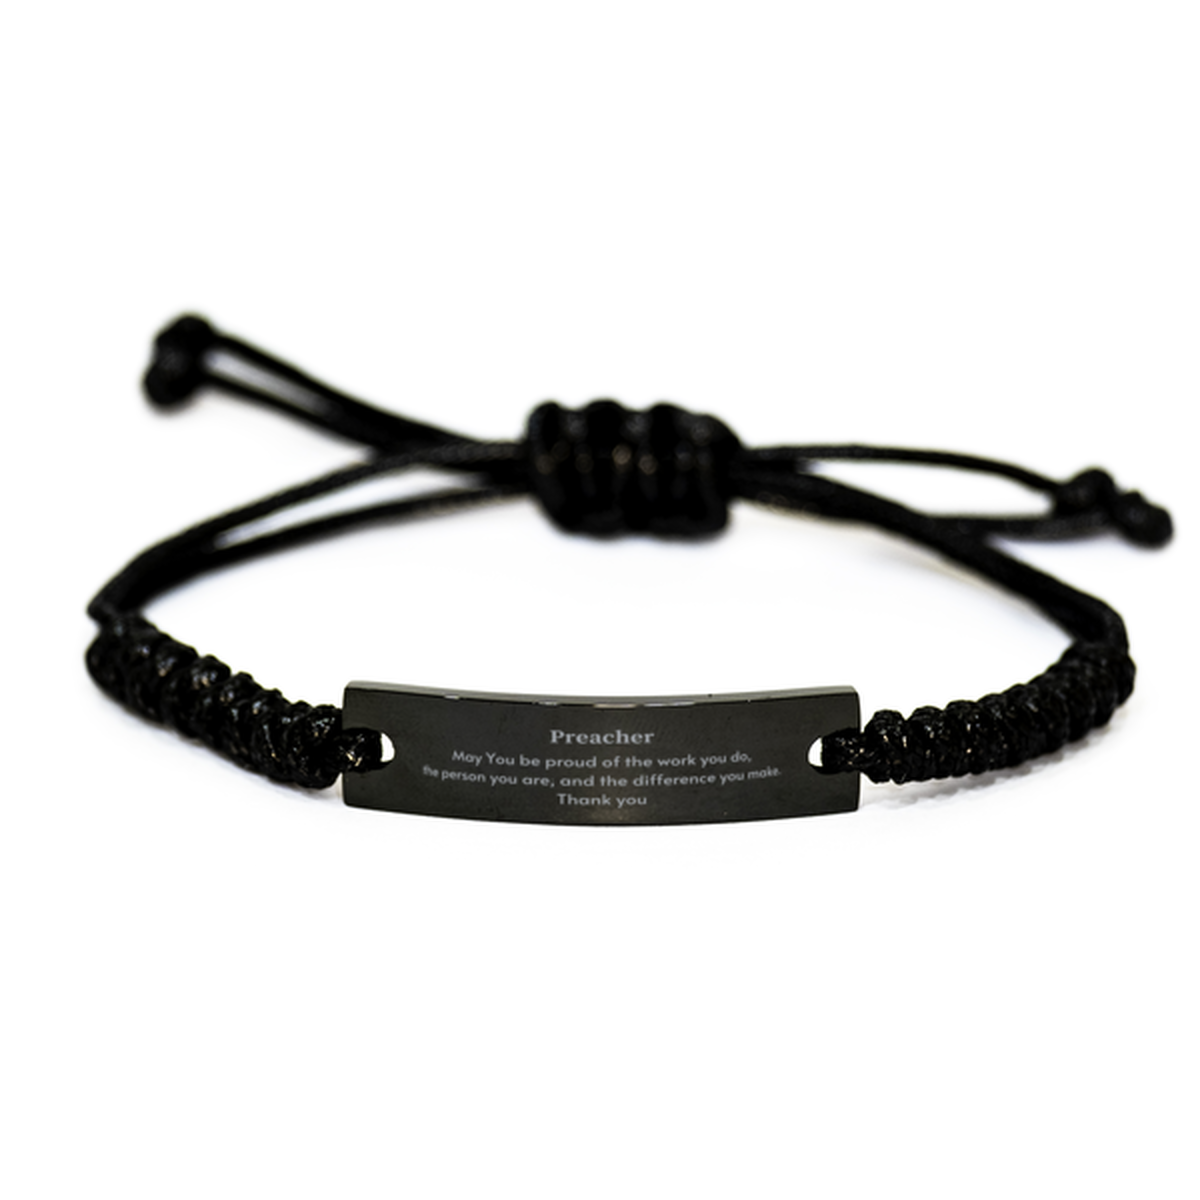 Heartwarming Black Rope Bracelet Retirement Coworkers Gifts for Preacher, Preacher May You be proud of the work you do, the person you are Gifts for Boss Men Women Friends